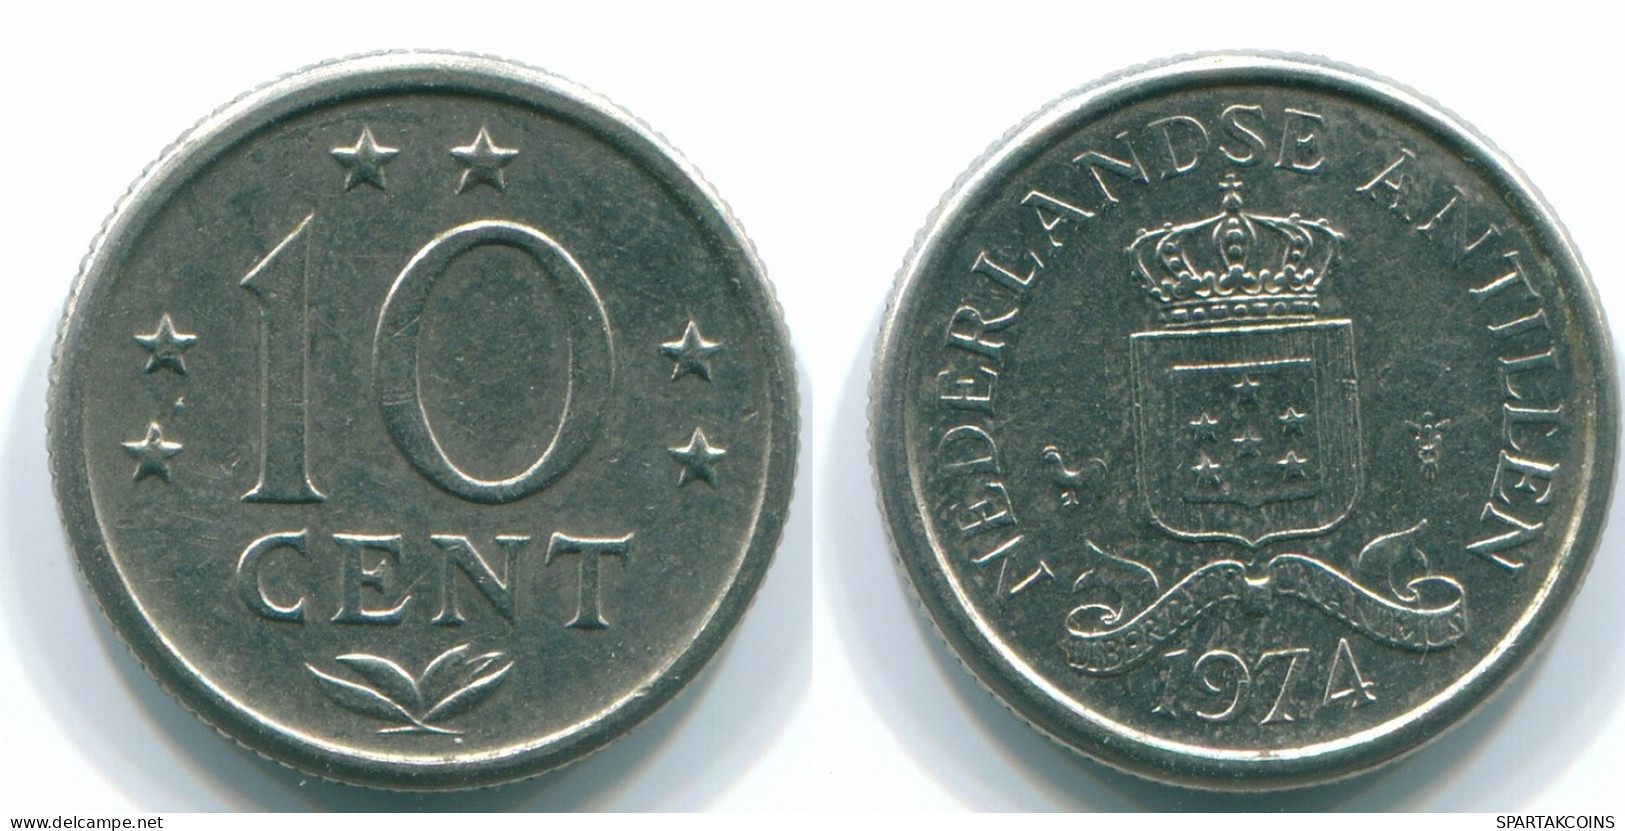 10 CENTS 1974 NETHERLANDS ANTILLES Nickel Colonial Coin #S13528.U.A - Antille Olandesi